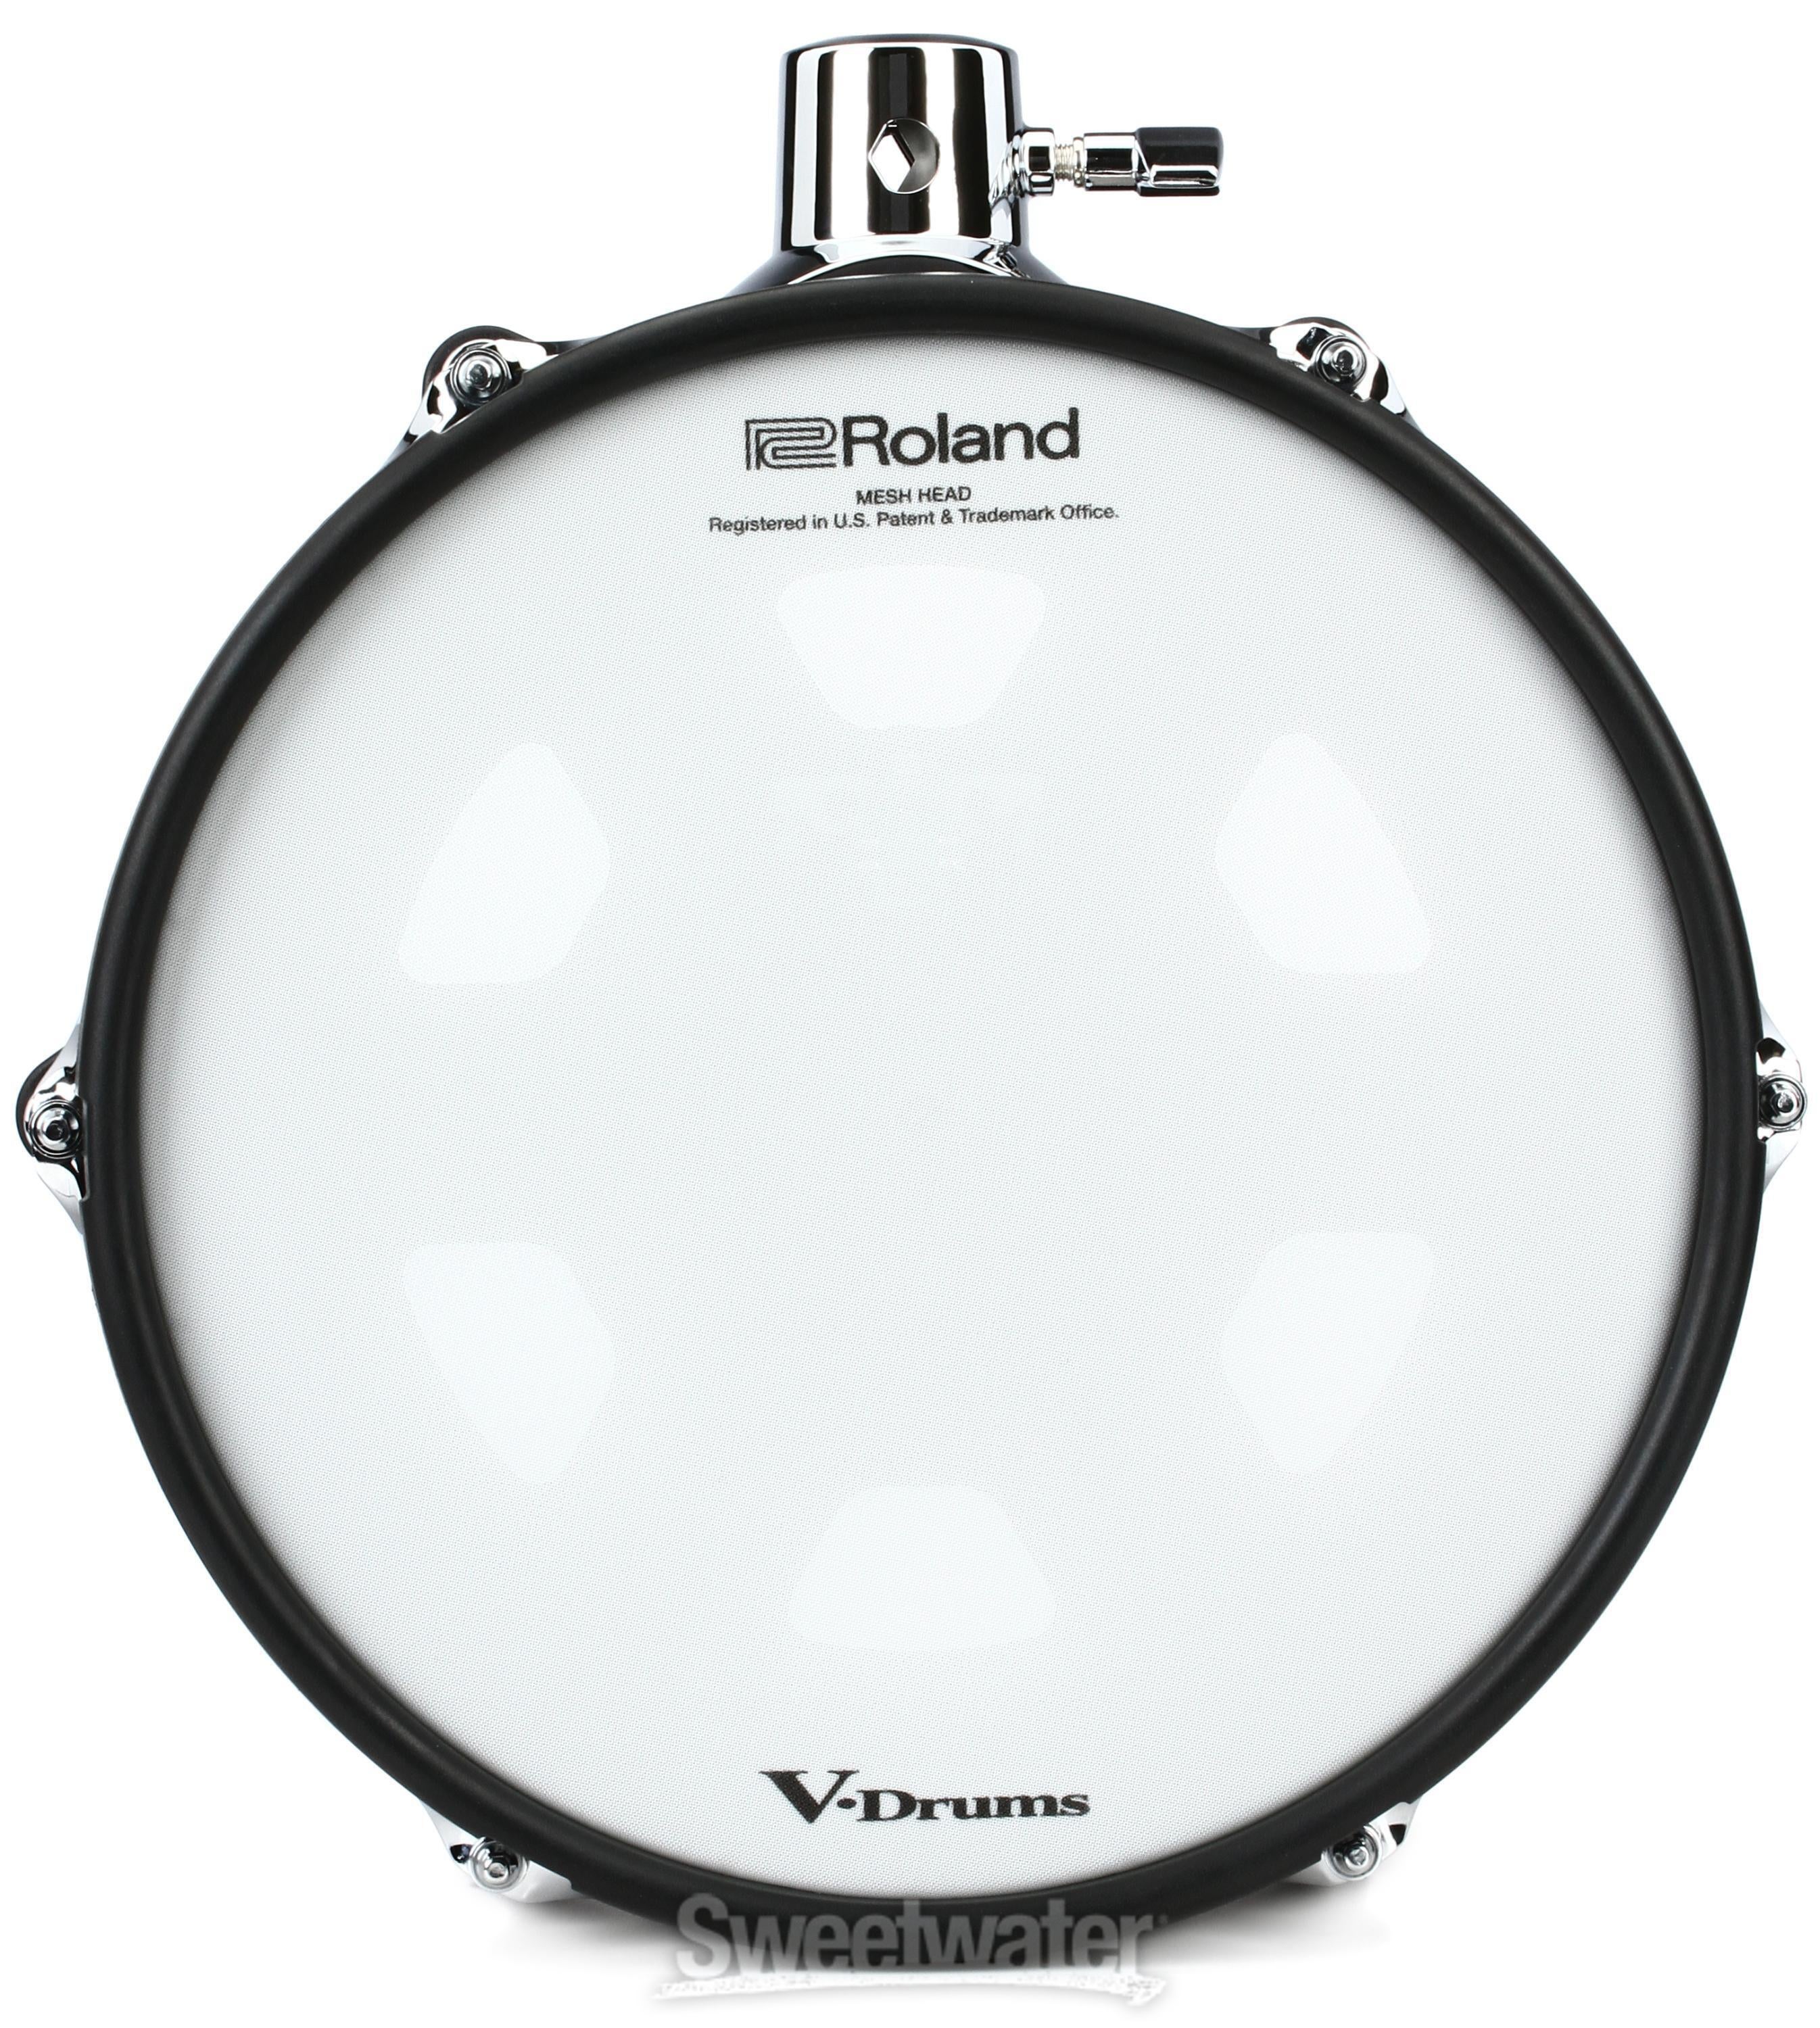 Roland V-Pad PD-128 12 inch Electronic Drum Pad | Sweetwater